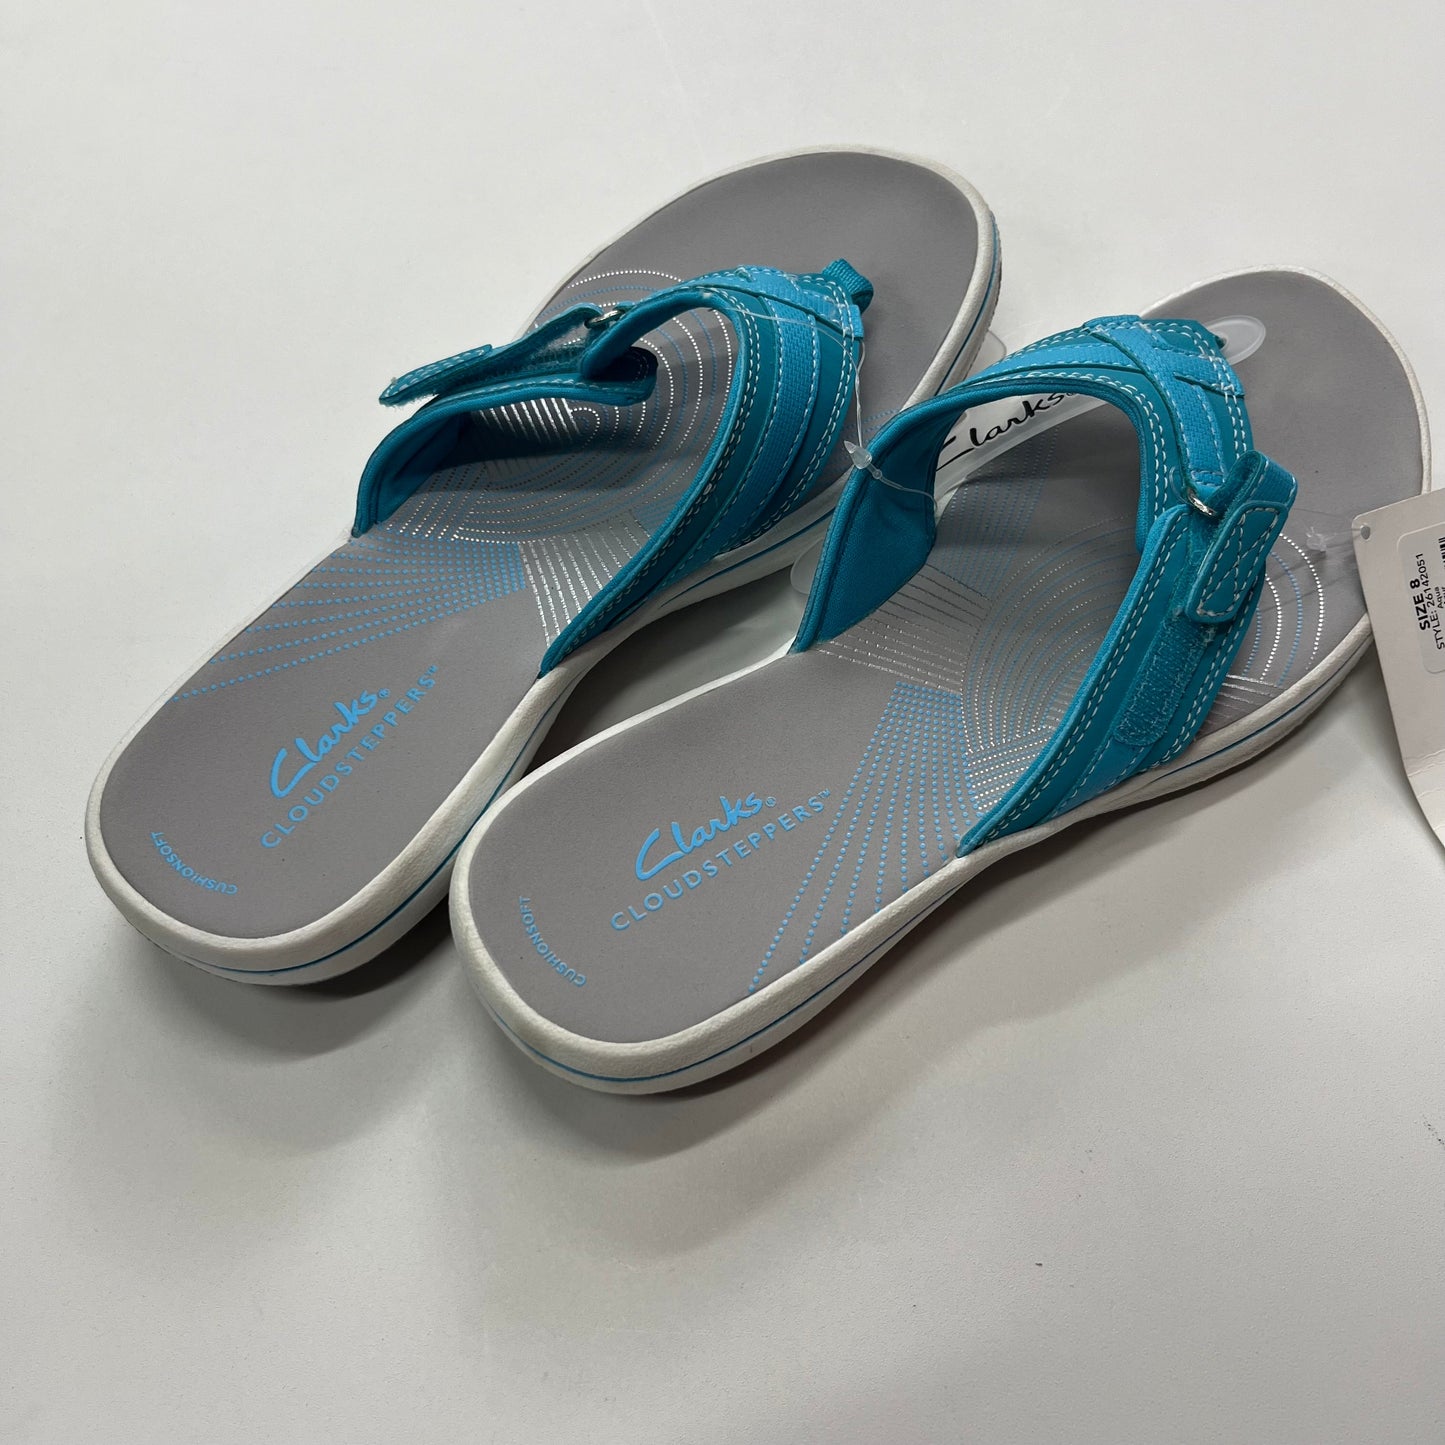 Sandals Flip Flops By Clarks NWT  Size: 8